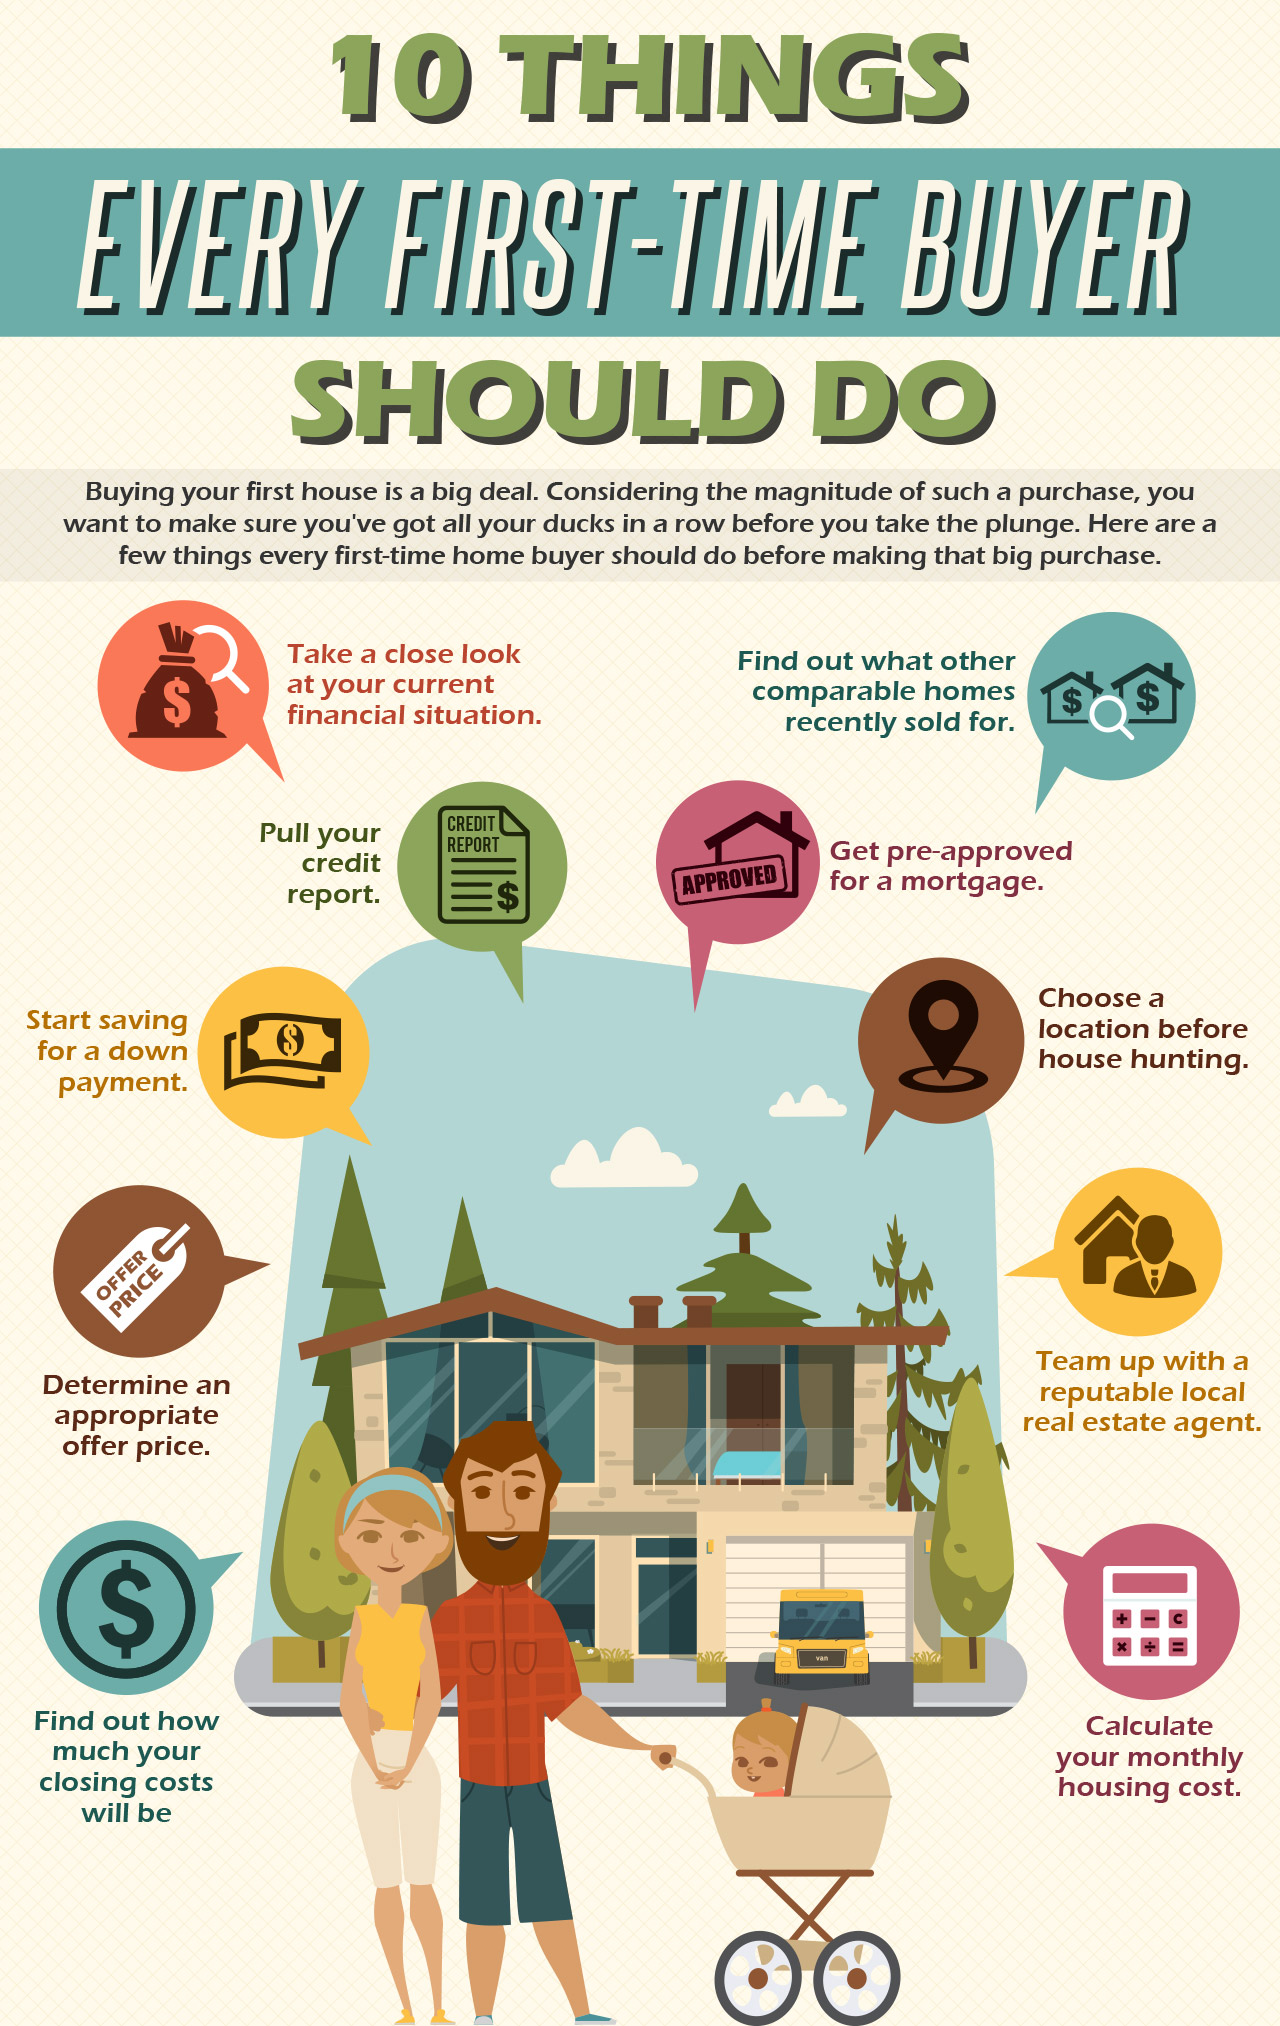 10-things-every-first-time-buyer-should-do